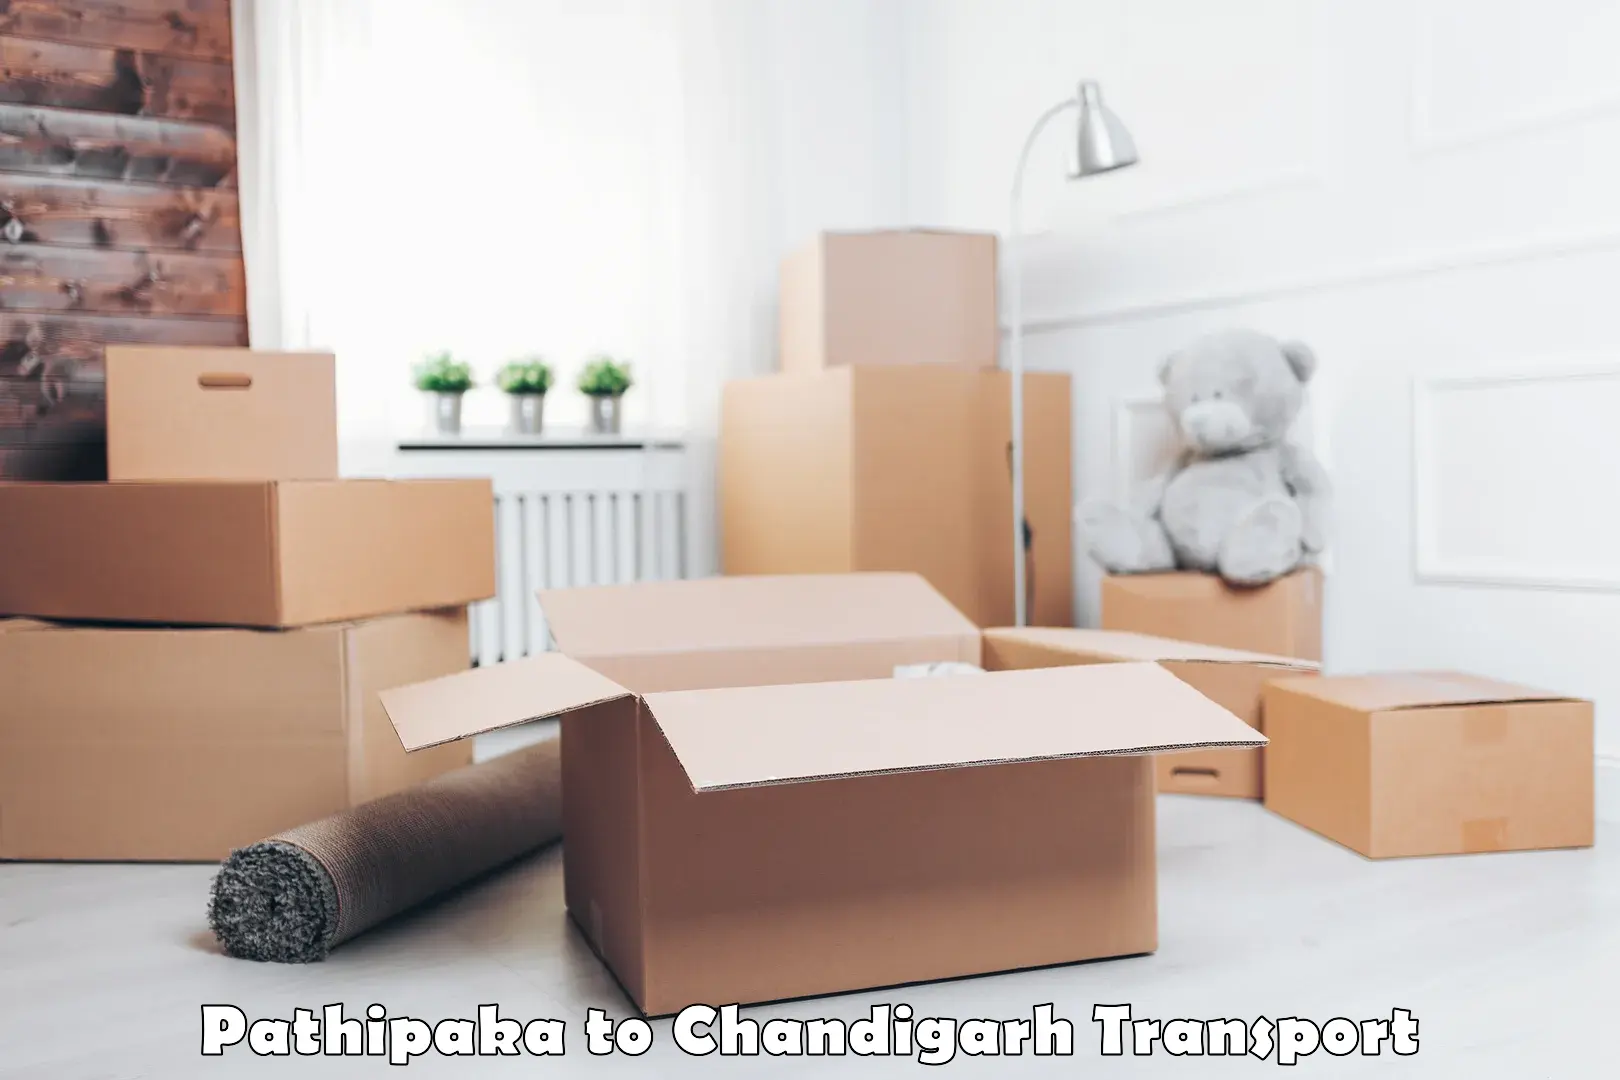 Air freight transport services Pathipaka to Chandigarh